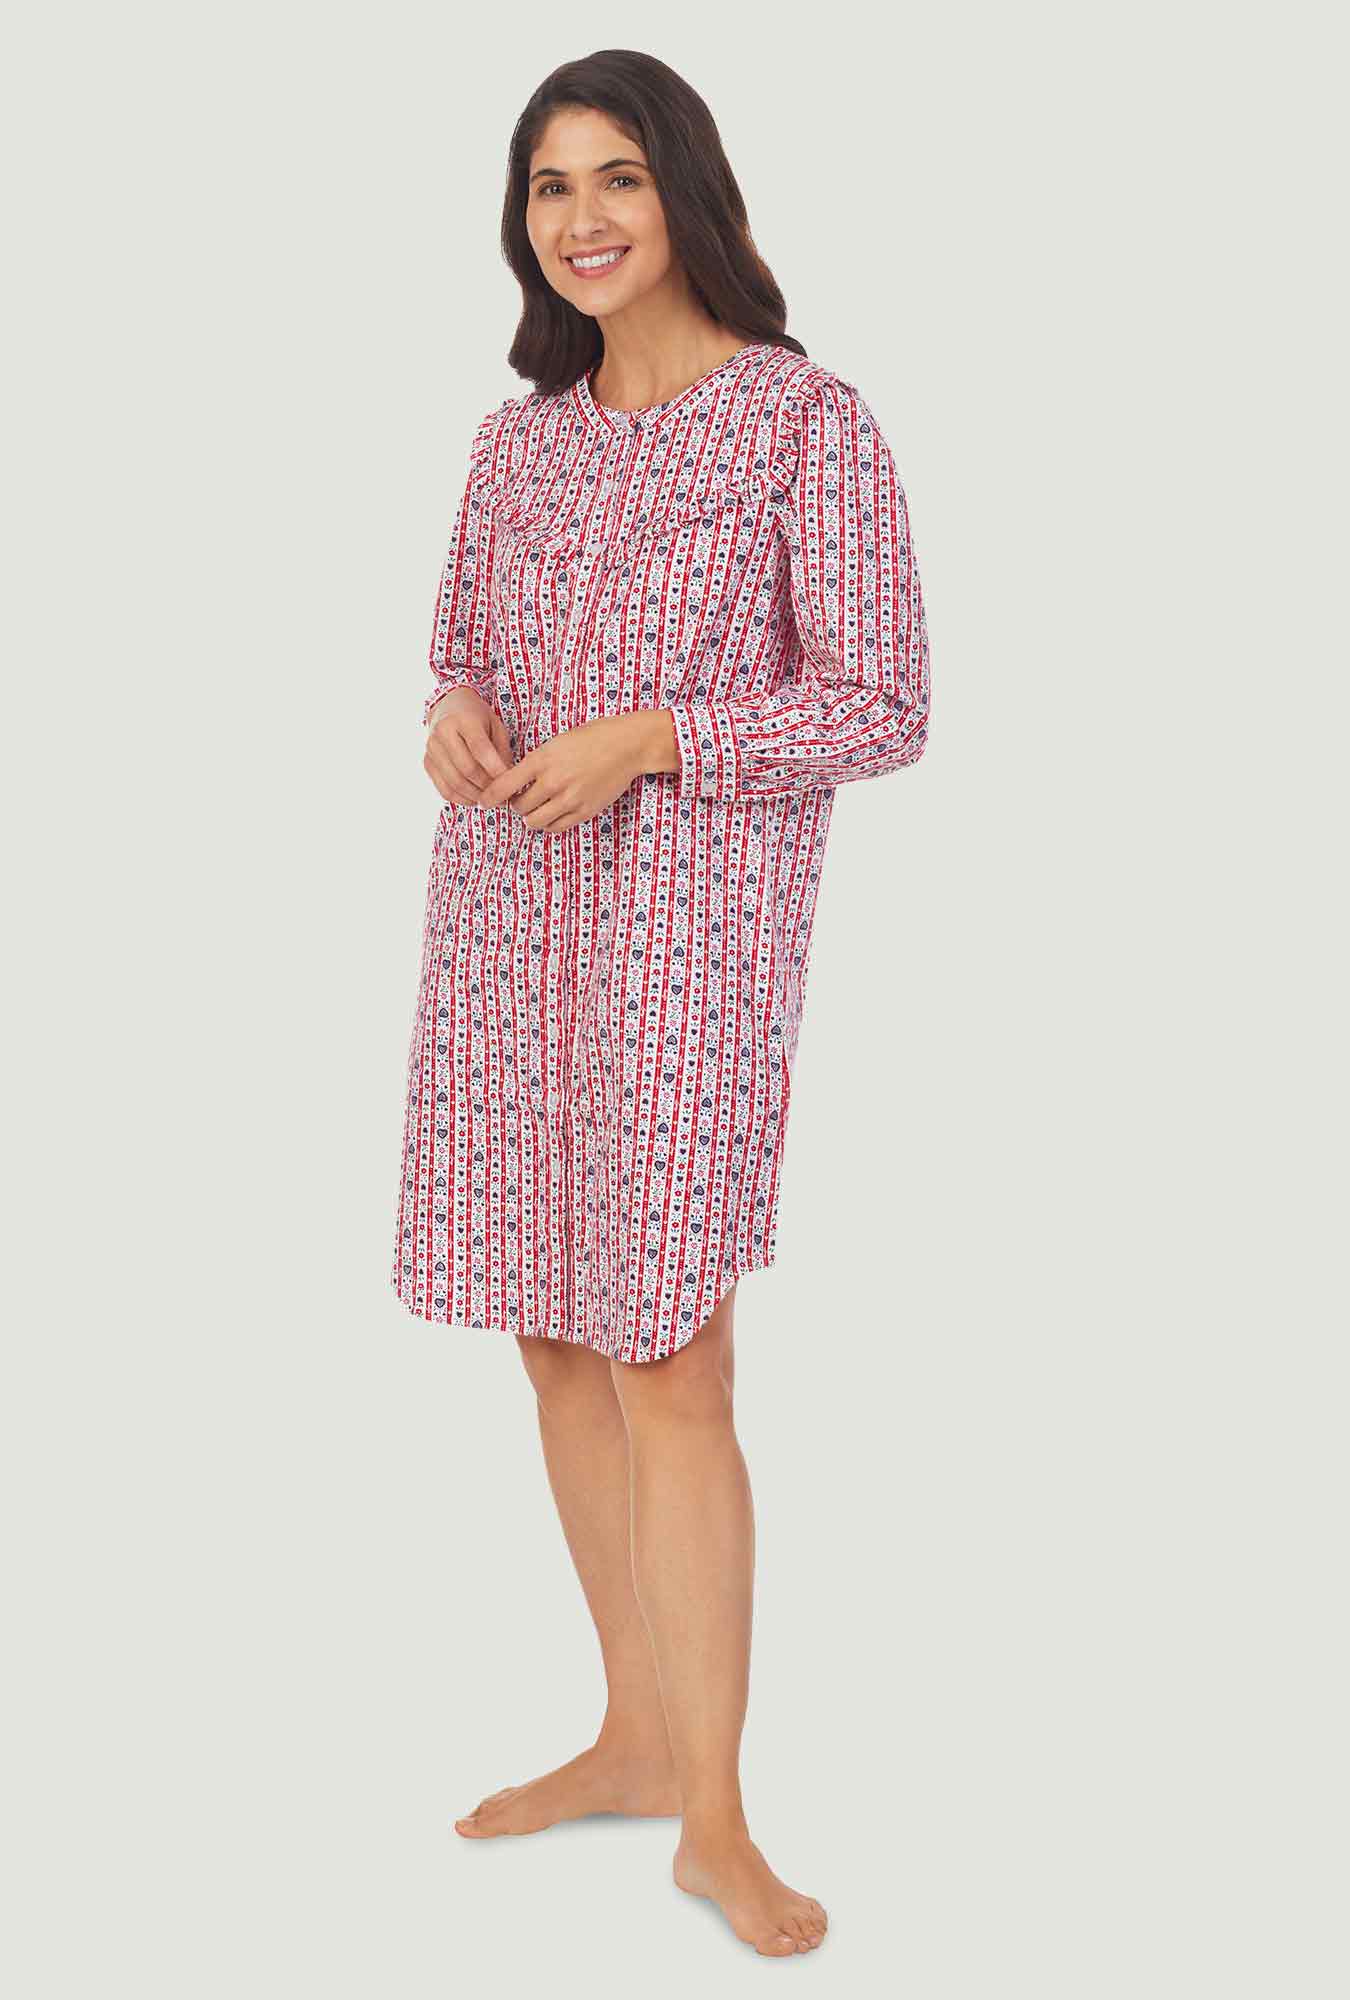  A lady wearing a red tyrolean long sleeve womens nightshirt.